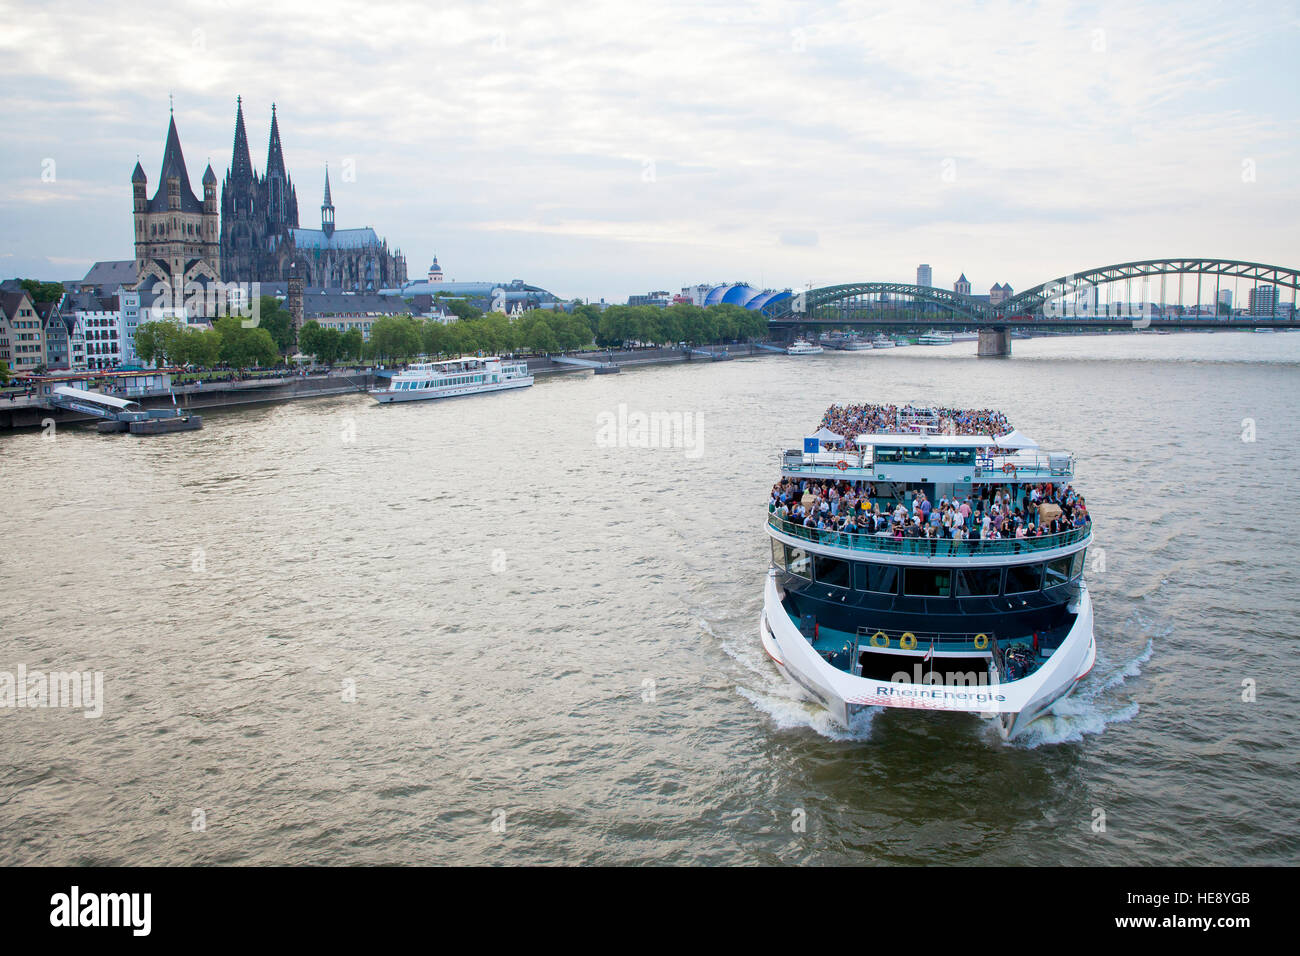 Germany, Cologne, the event ship RheinEnergie, river Rhine, Cologne cathedral an church Gross St. Martin. Stock Photo